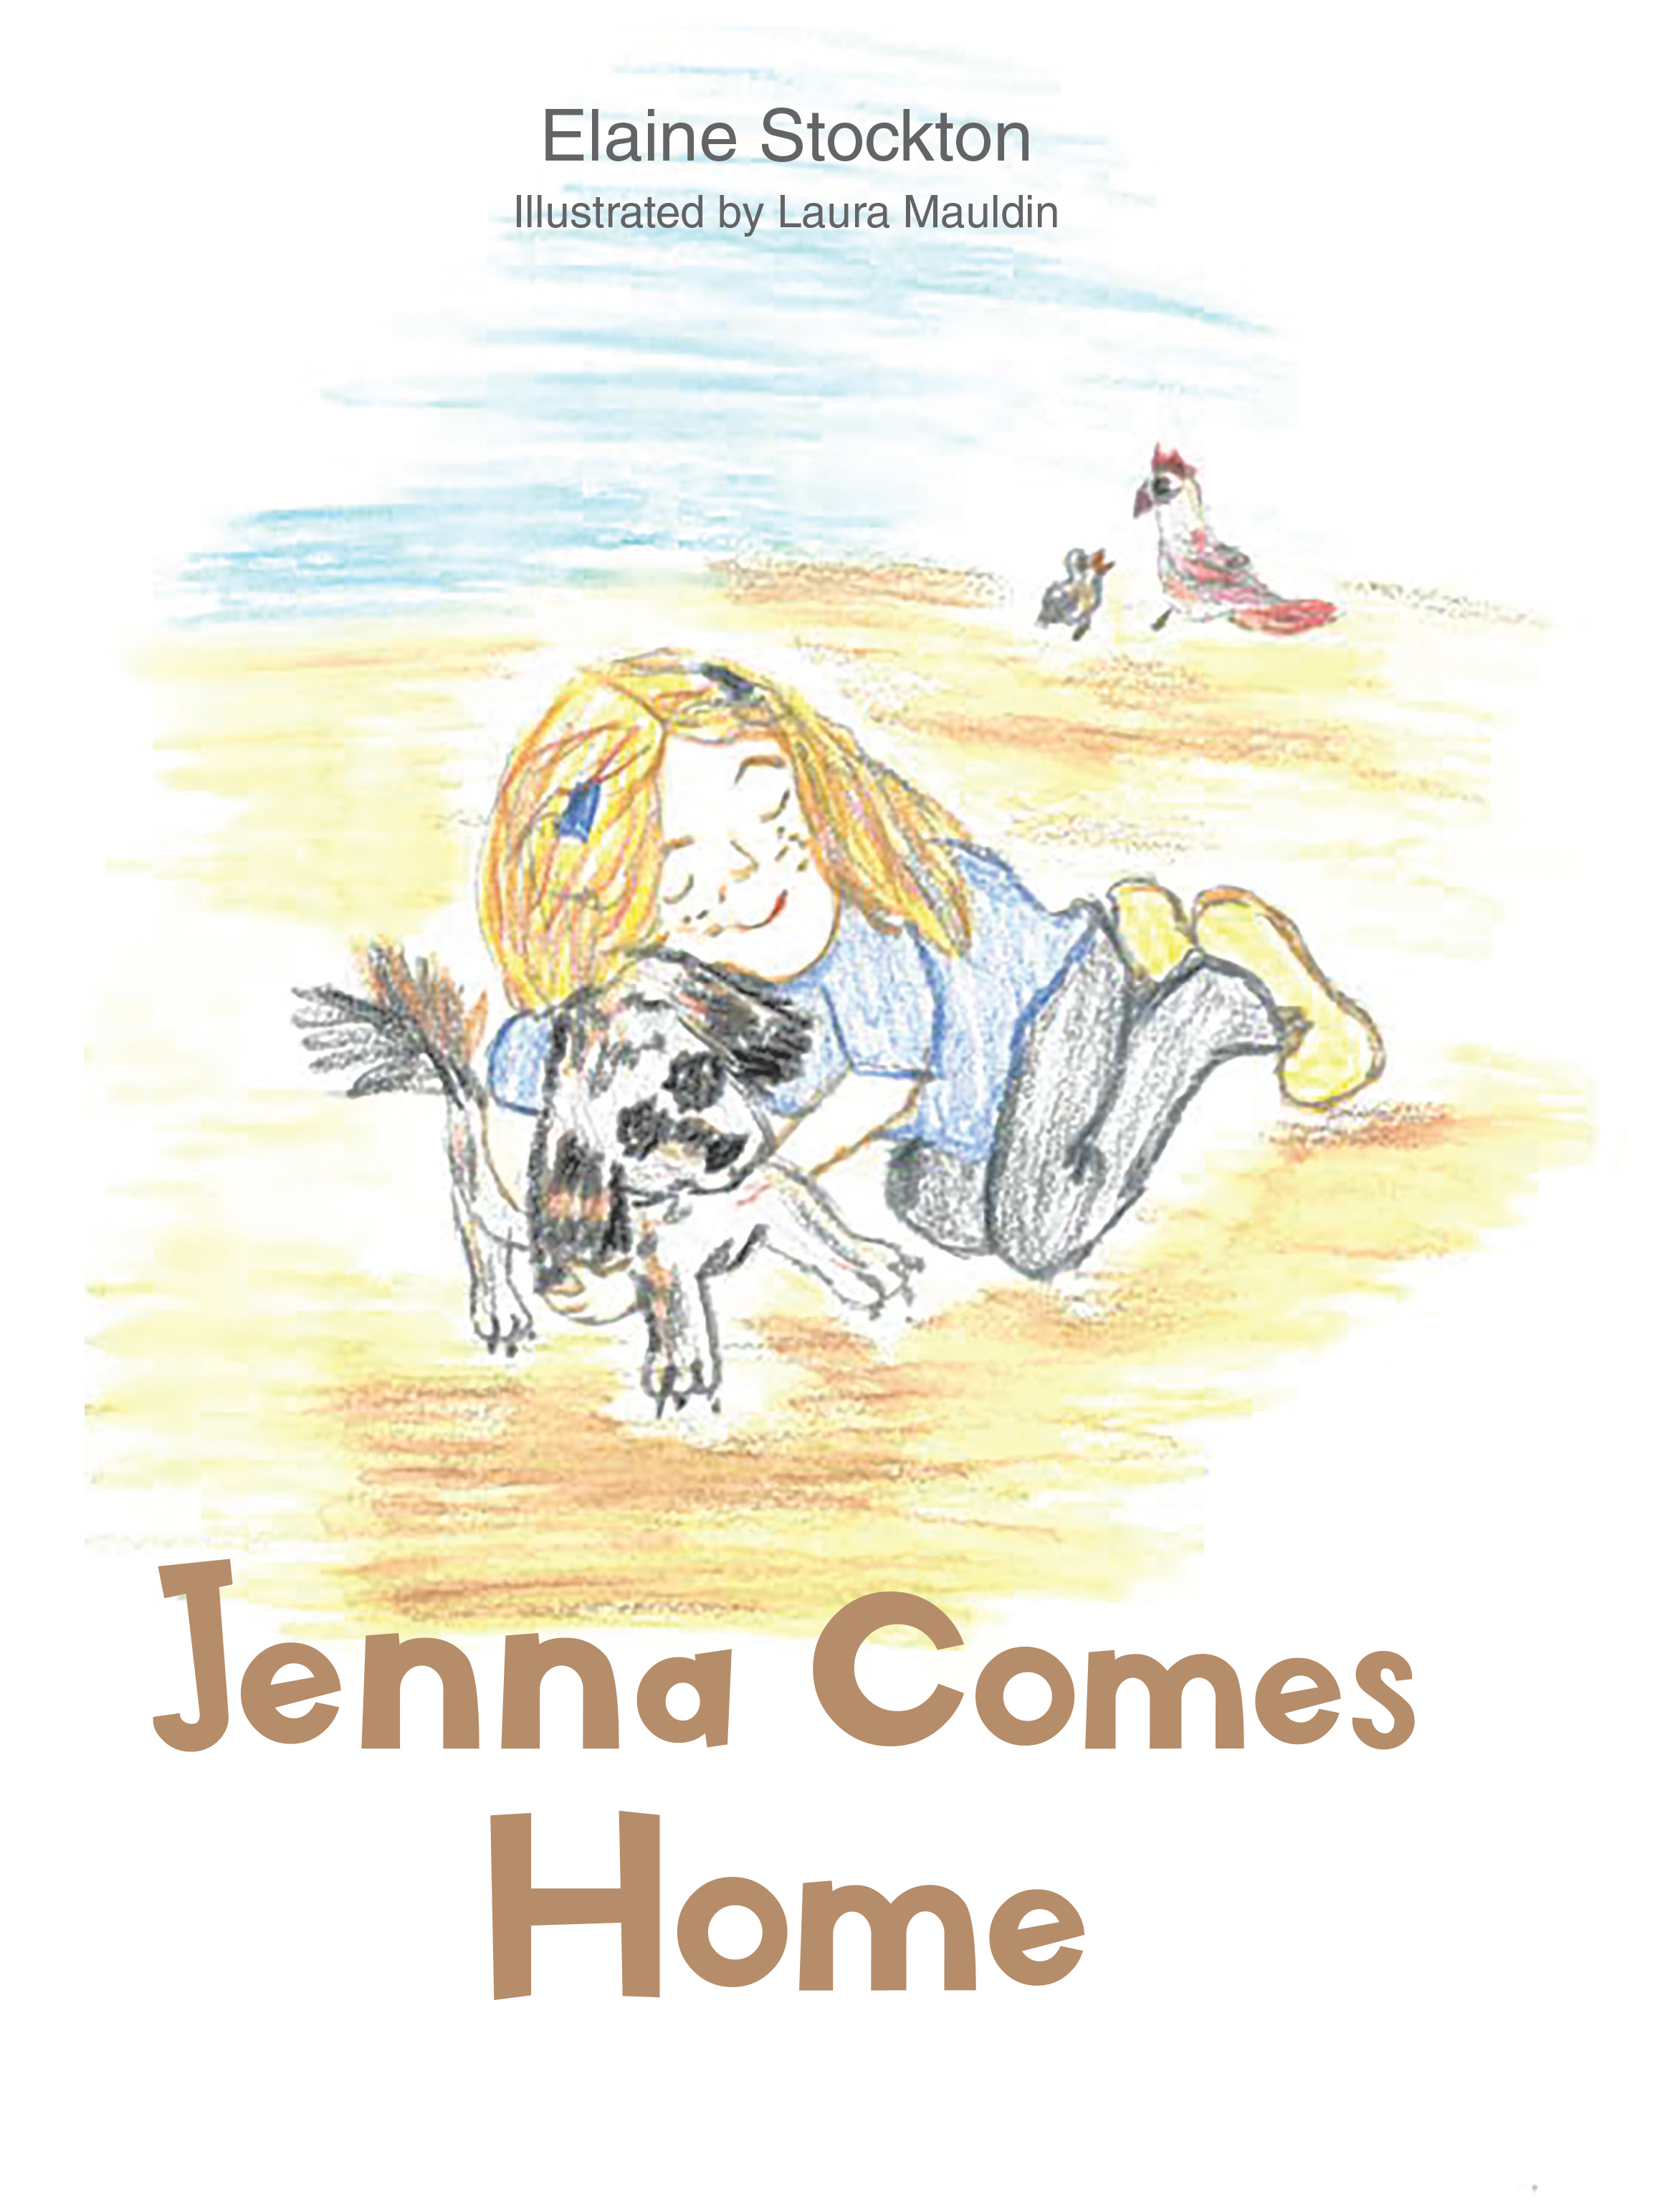 Elaine Stockton’s Newly Released "Jenna Comes Home" is a Heartwarming Journey of Friendship and Adventure